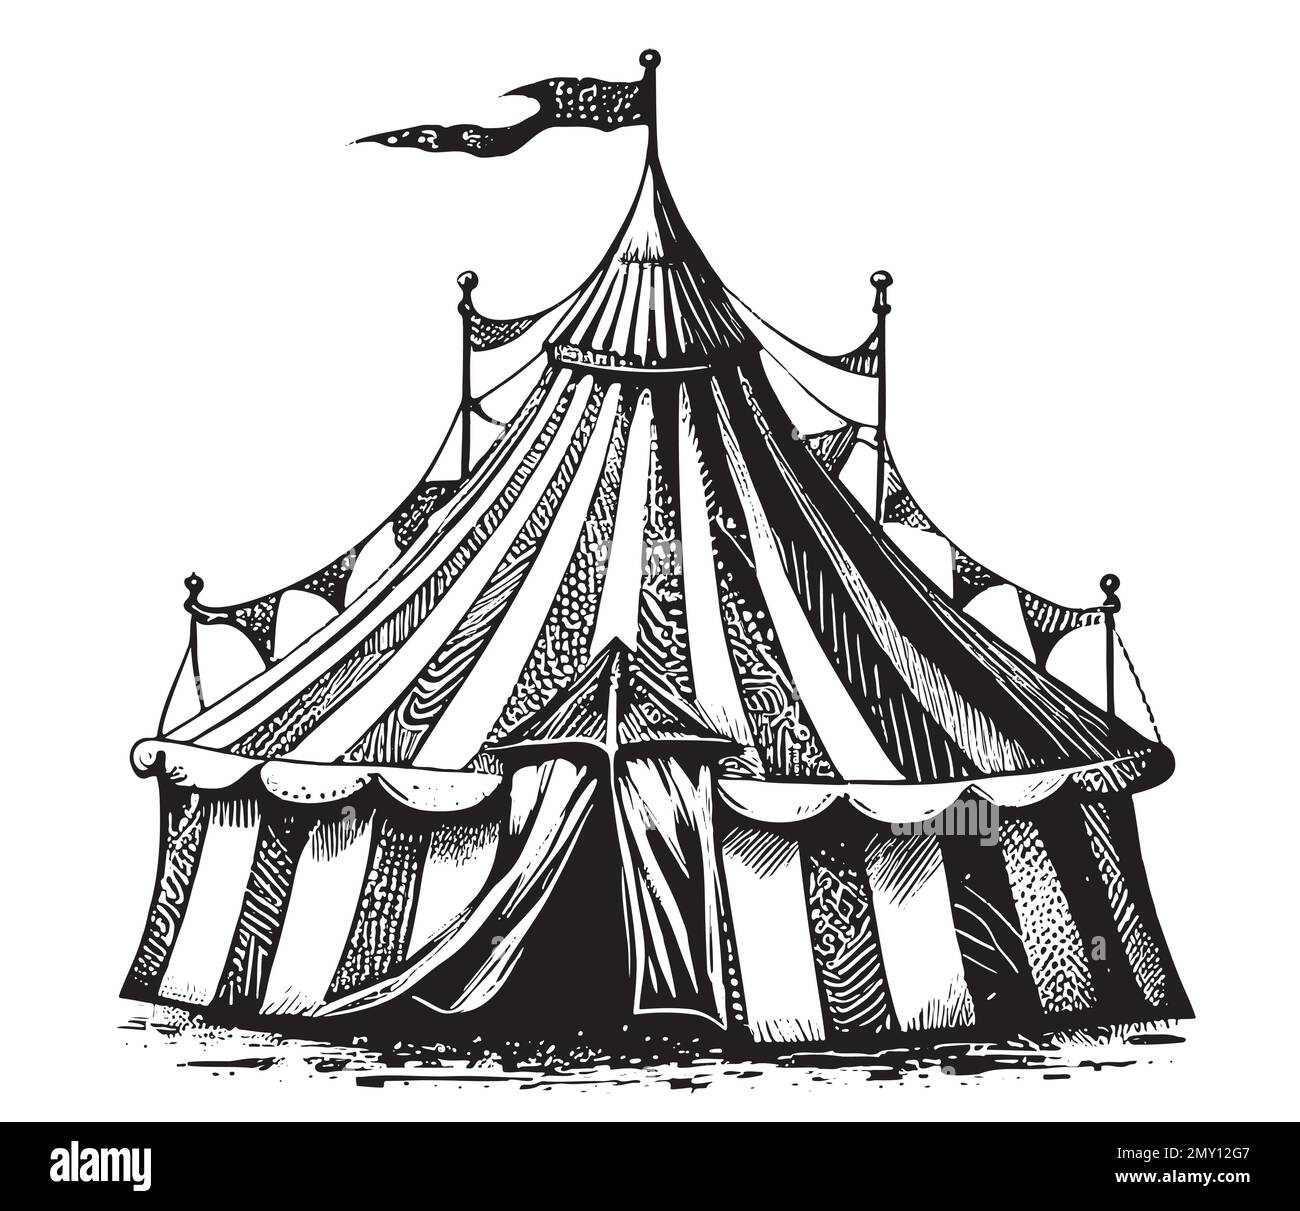 Circus tent hand drawn sketch Vector illustration Stock Vector Image